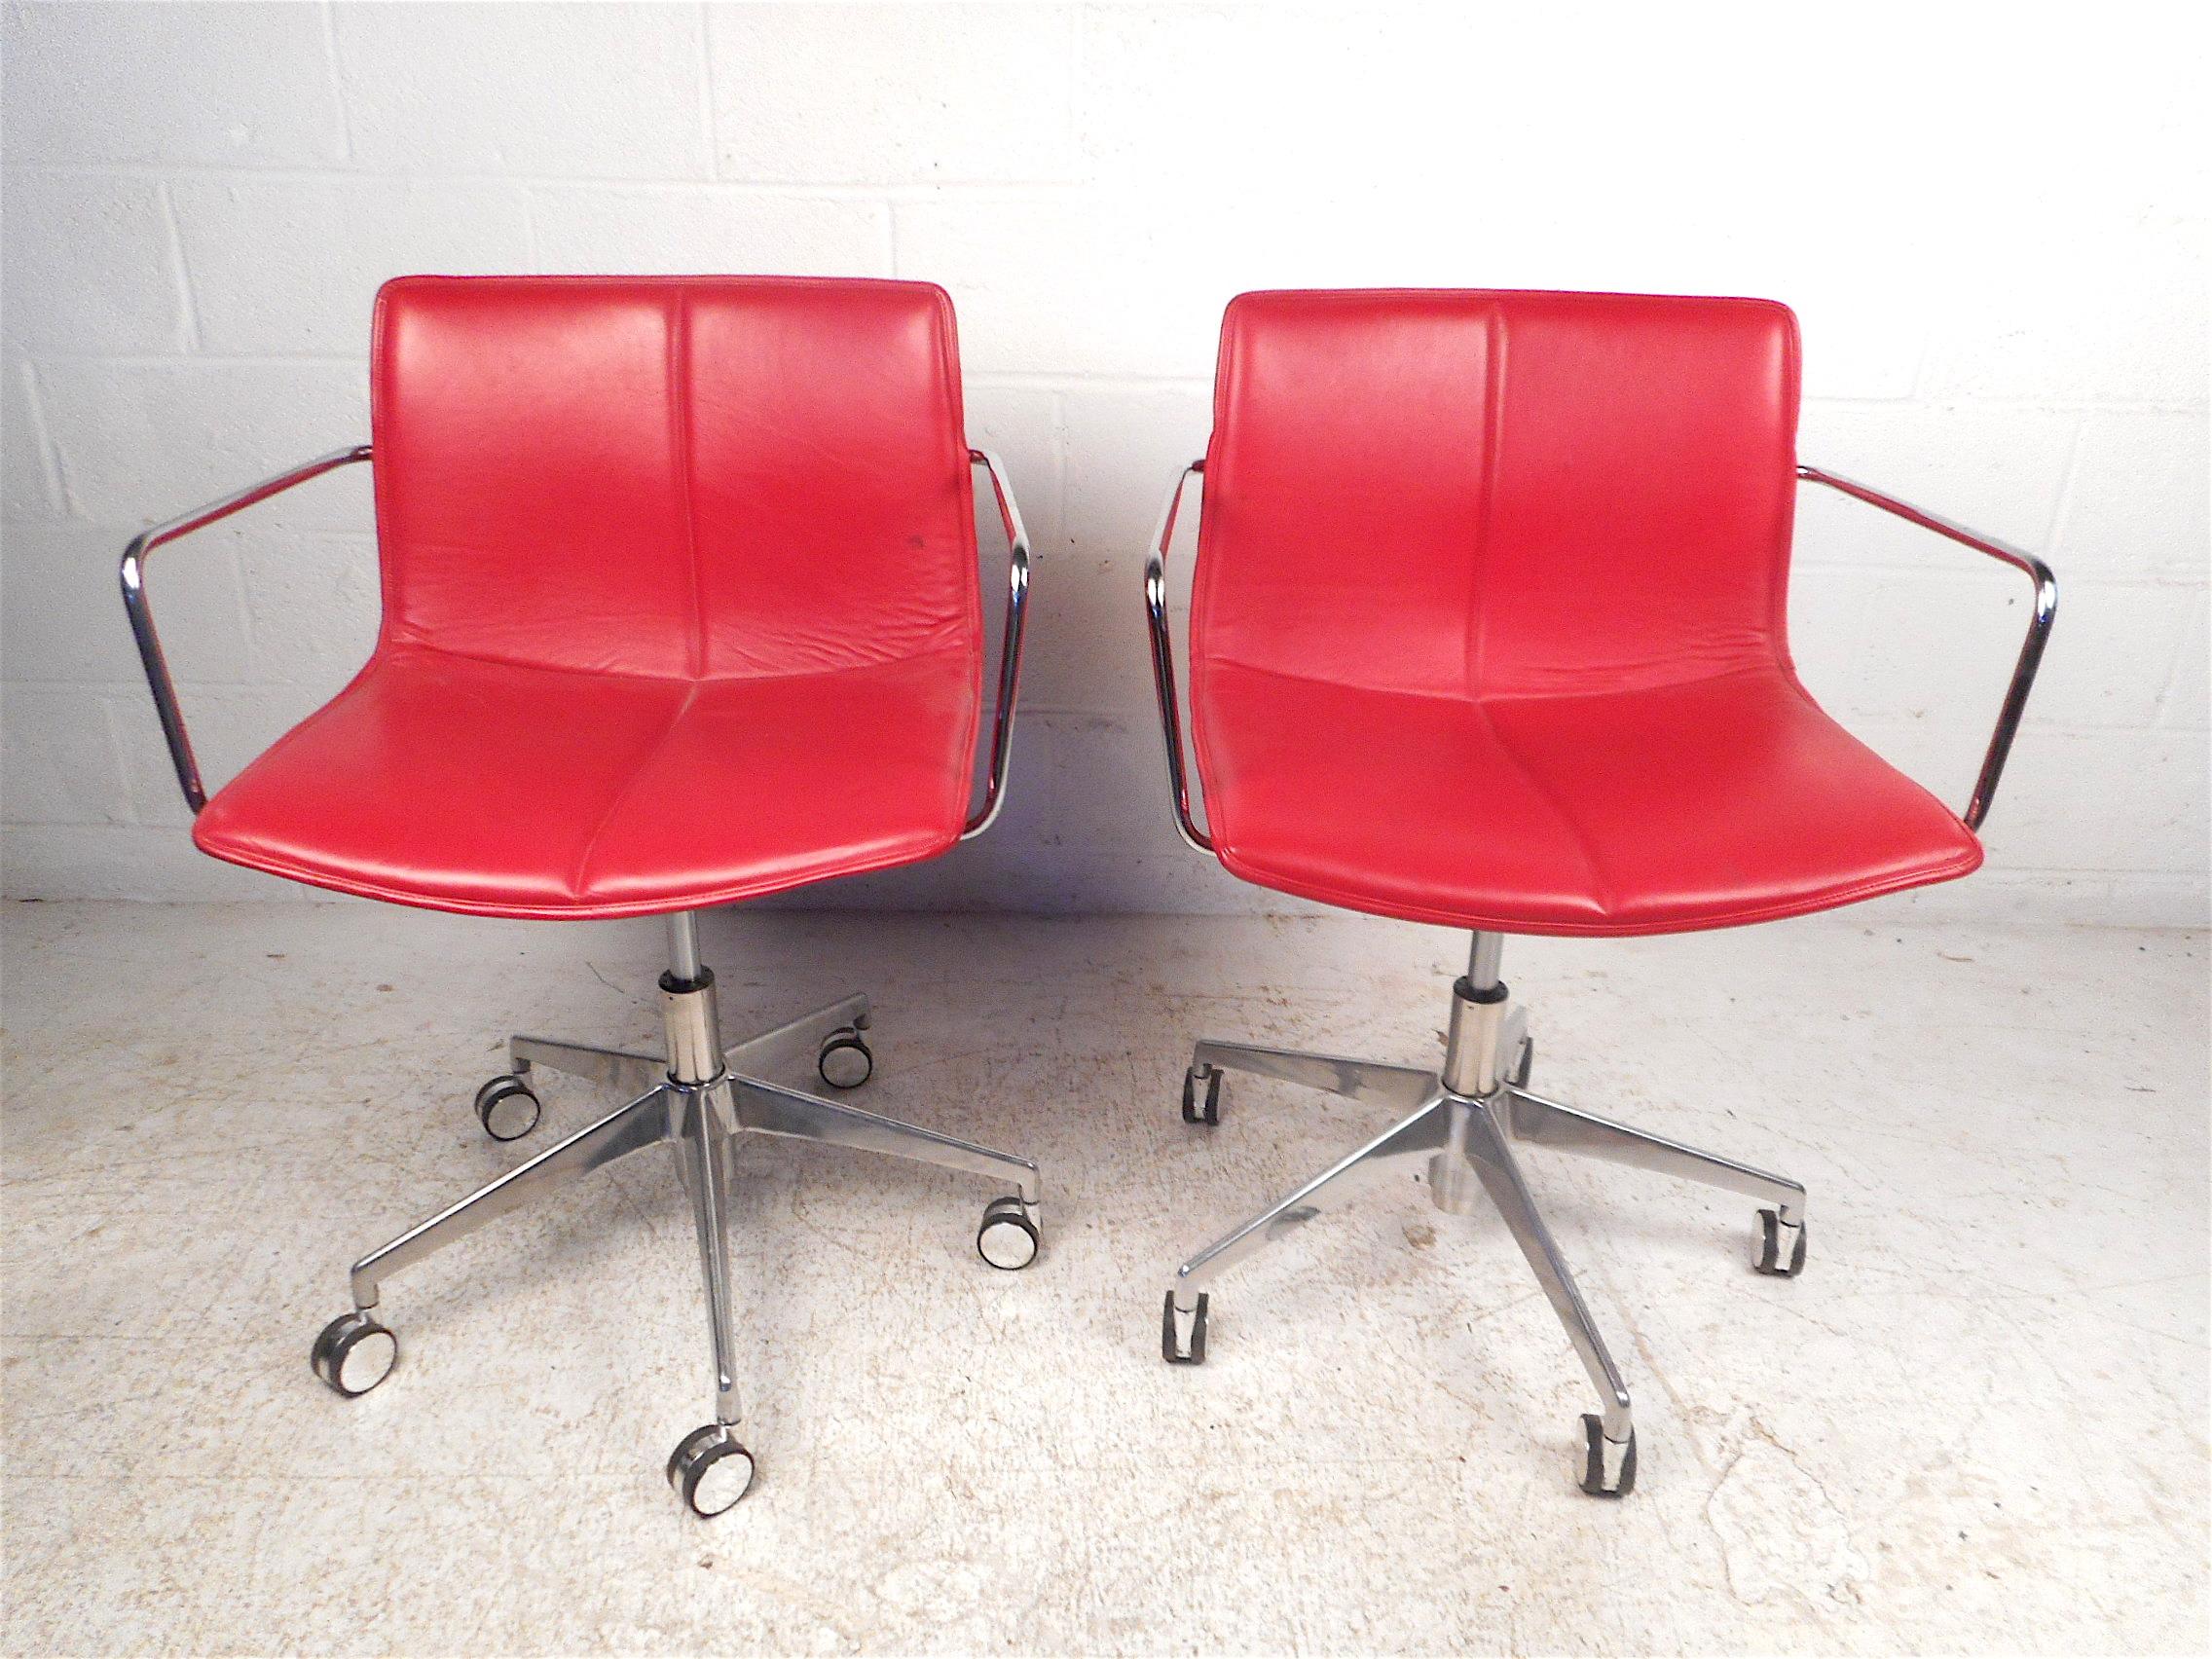 Stylish pair of modern chairs. Comfortable form-fitting seats covered in a vibrant red faux-leather upholstery. Sturdy chrome supports, bases, and armrests. Adjustable height settings ranging from 35